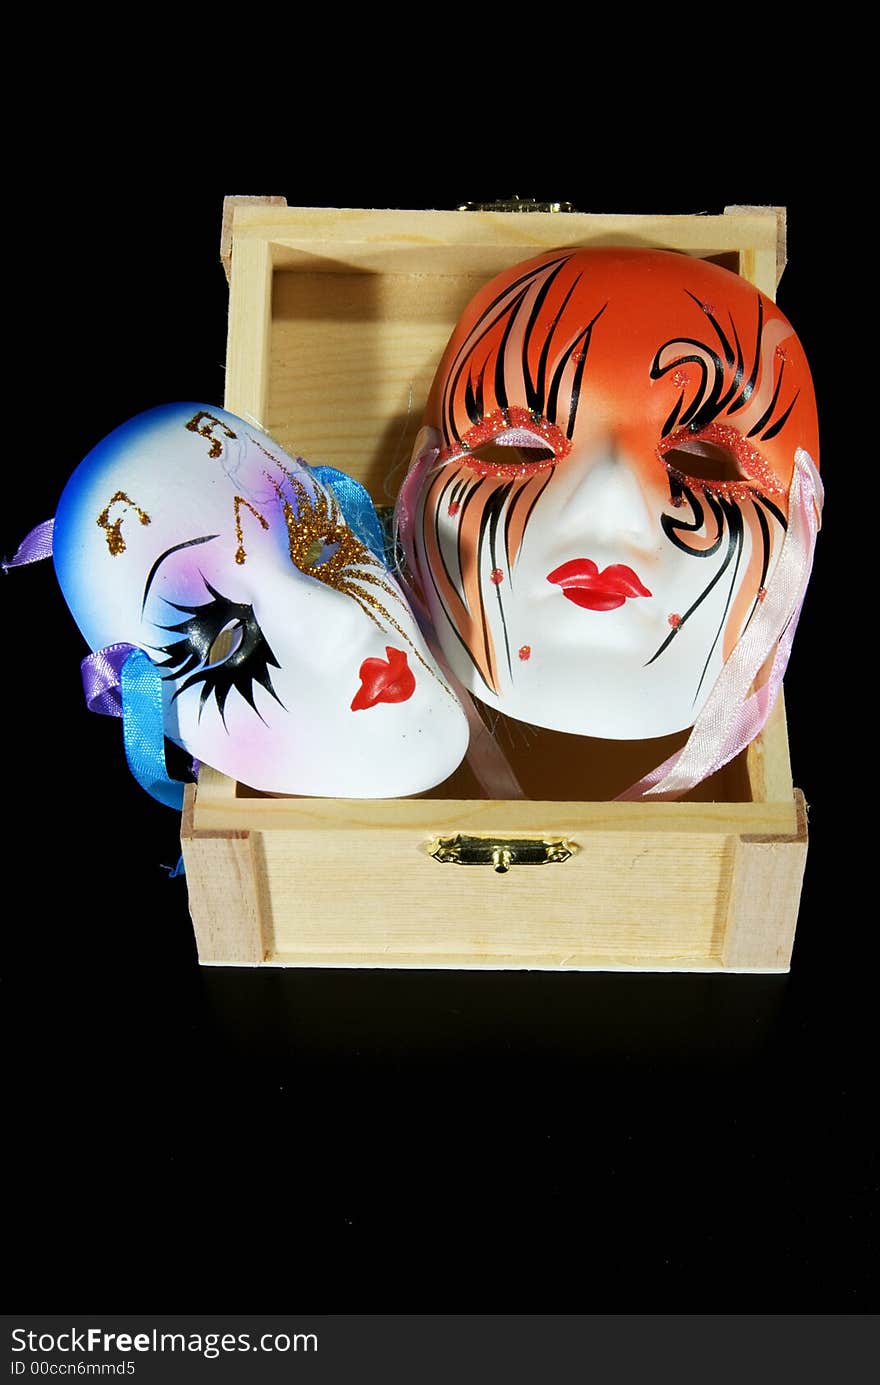 Some original venetian carnival masks in a wooden chest